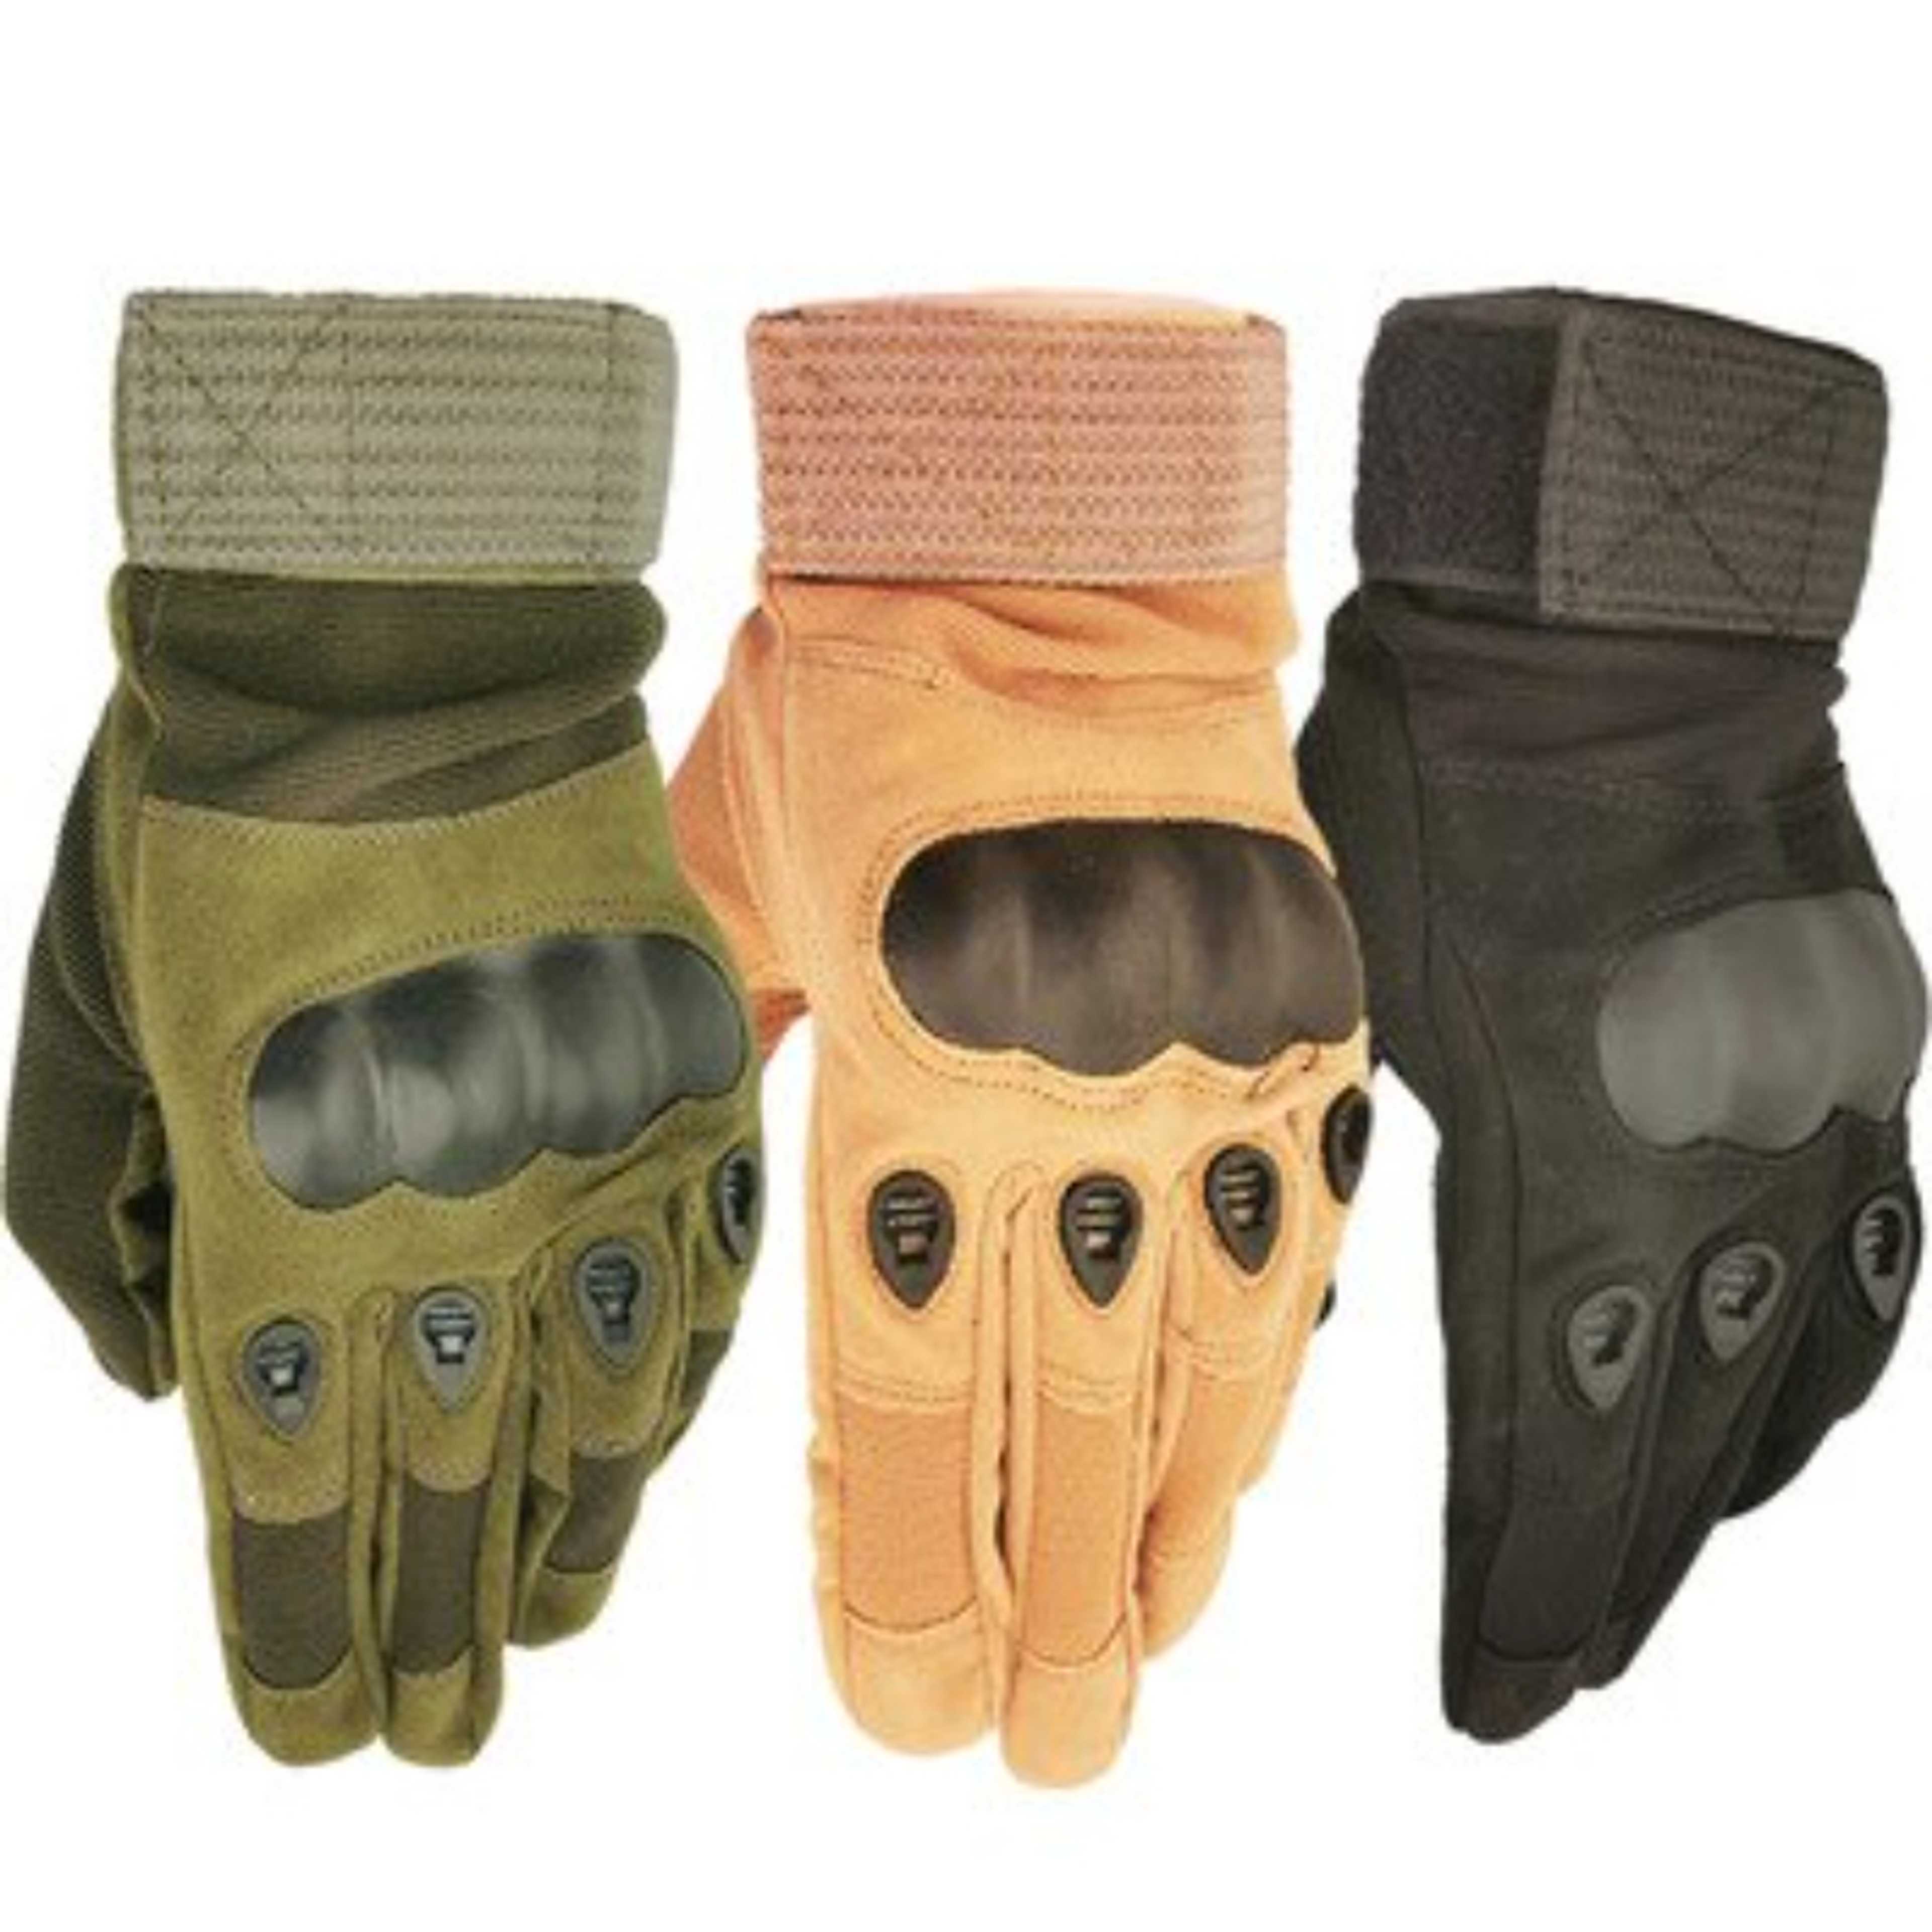 Outdoor Sports Gloves Full Finger For Hiking Riding Cycling Men's Gloves Armor Protection Shell Gloves